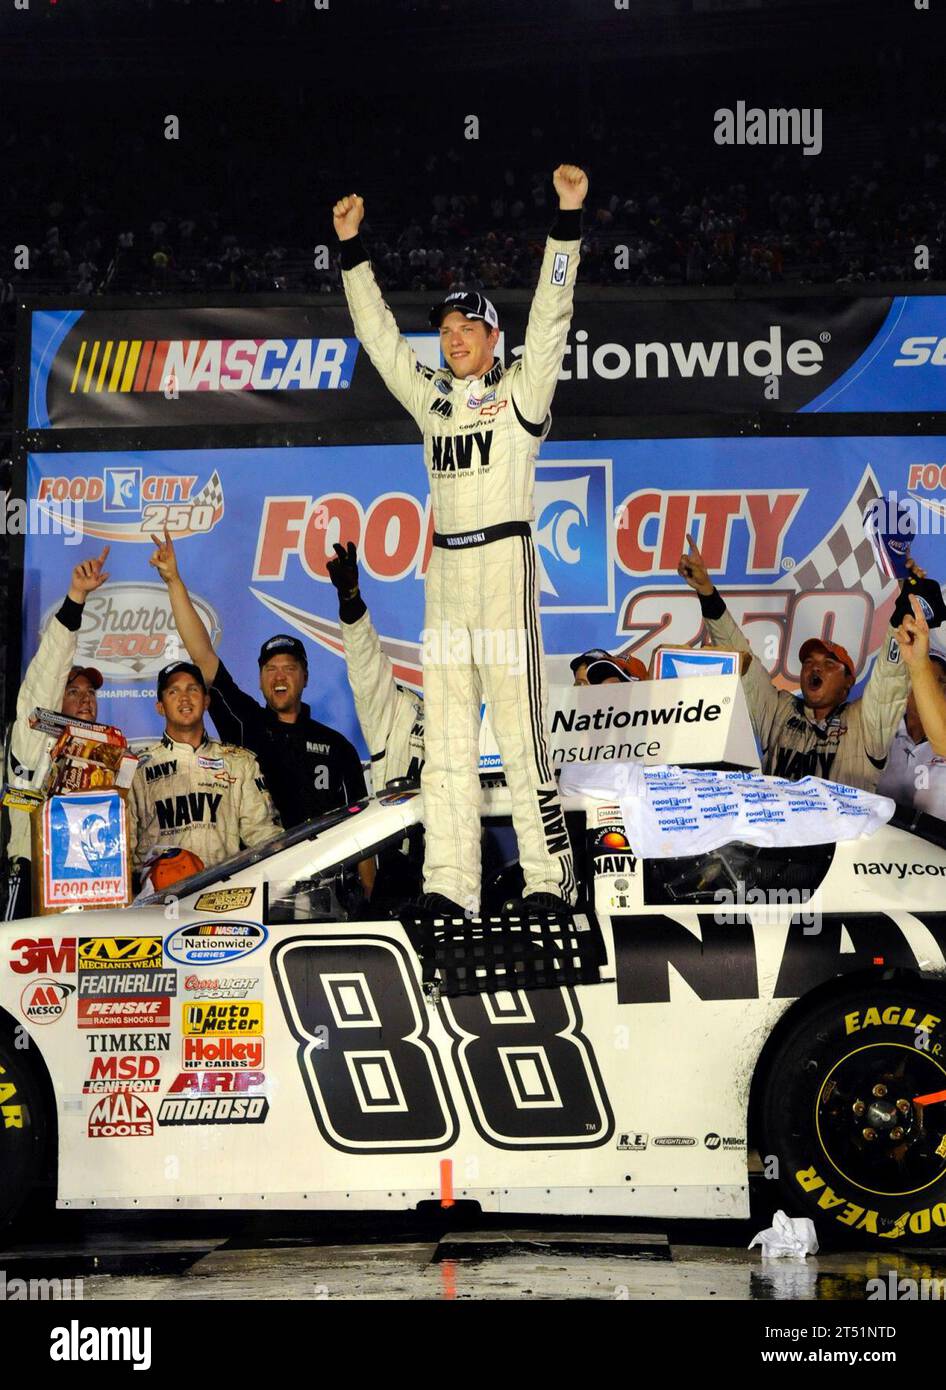 0808225345W-213 BRISTOL, Tenn. (Aug. 22, 2008) JR Motorsports driver Brad Keselowski celebrates on top of the No. 88 U.S. Navy Chevrolet Monte Carlo along with his crew in victory lane after winning the NASCAR Nationwide Series Food City 250 at Bristol Motor Speedway in Bristol. Keselowski overcame a 37th place starting position to claim his second career victory and won second place overall in the nationwide championship standings. Navy Stock Photo